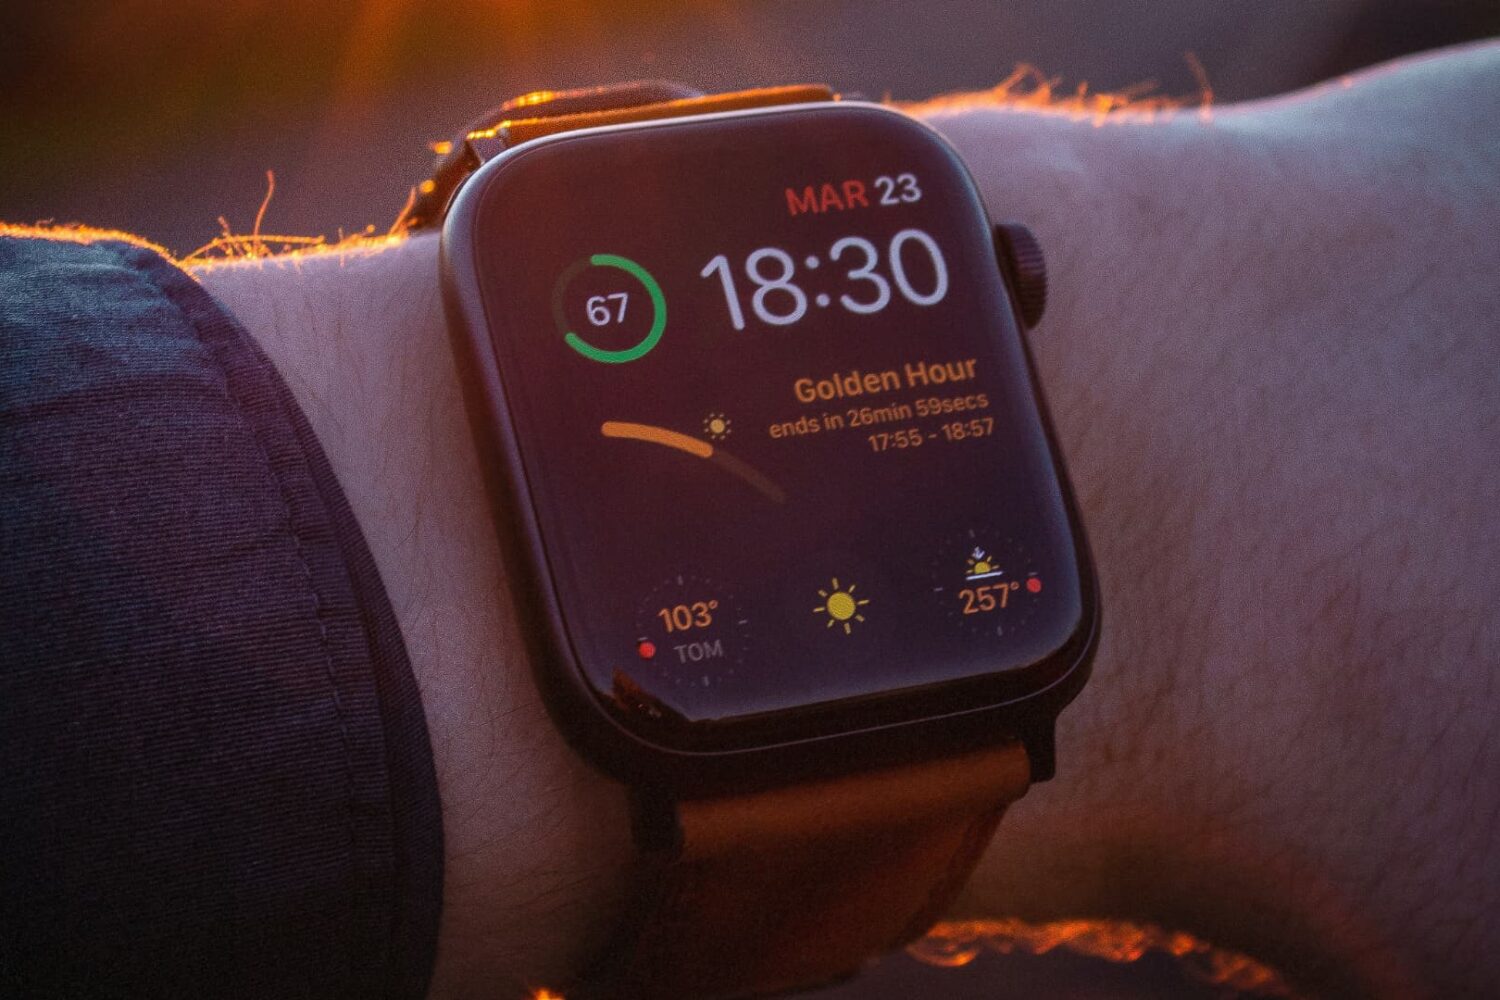 Apple Watch on male wrist, displaying a complication showing gold hour progression